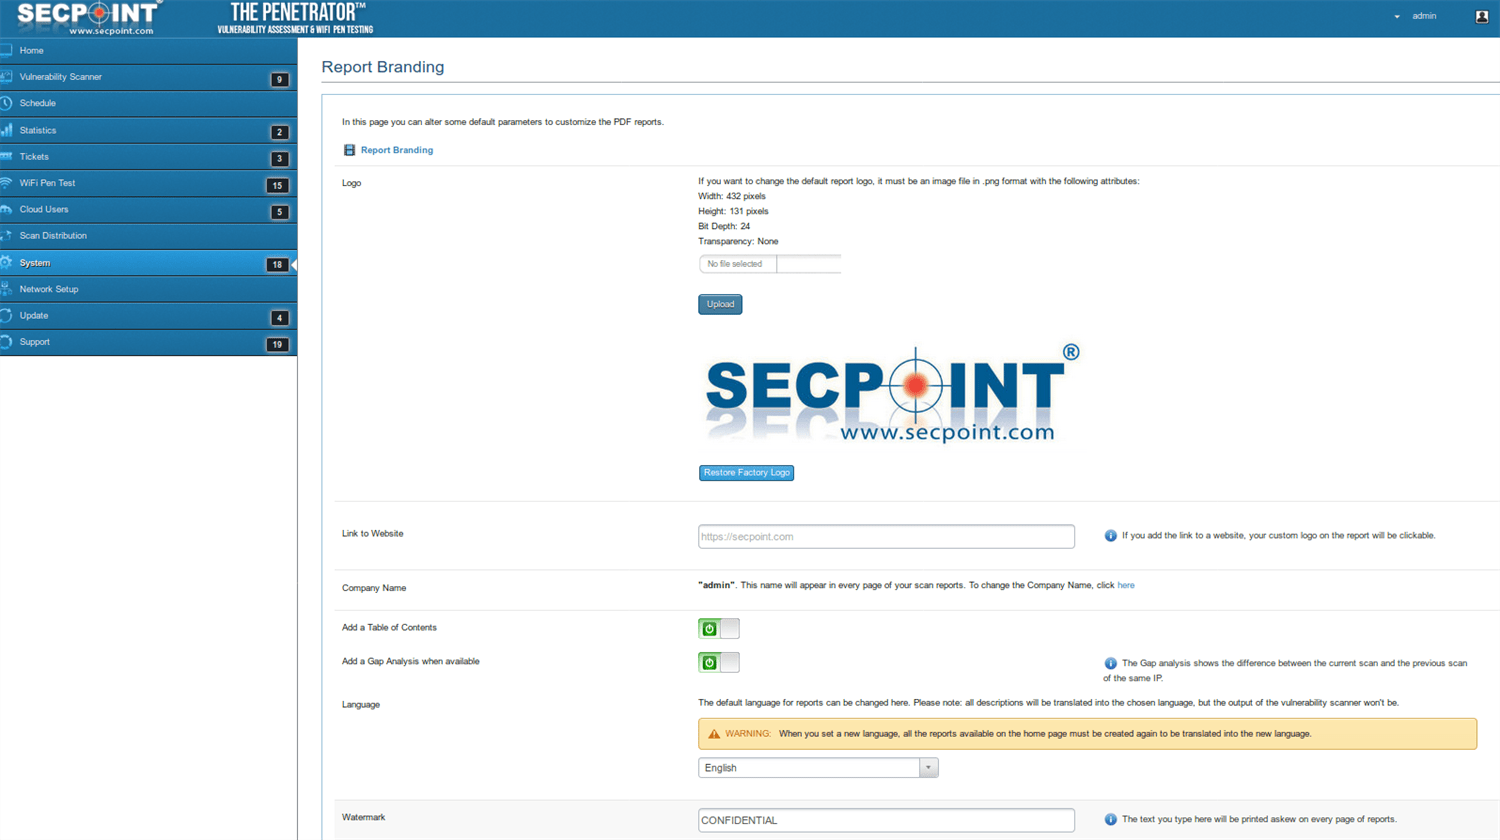 SecPoint Penetrator S9 - 4 IP Concurrent Scan License 1 Year Renewal - SecPoint